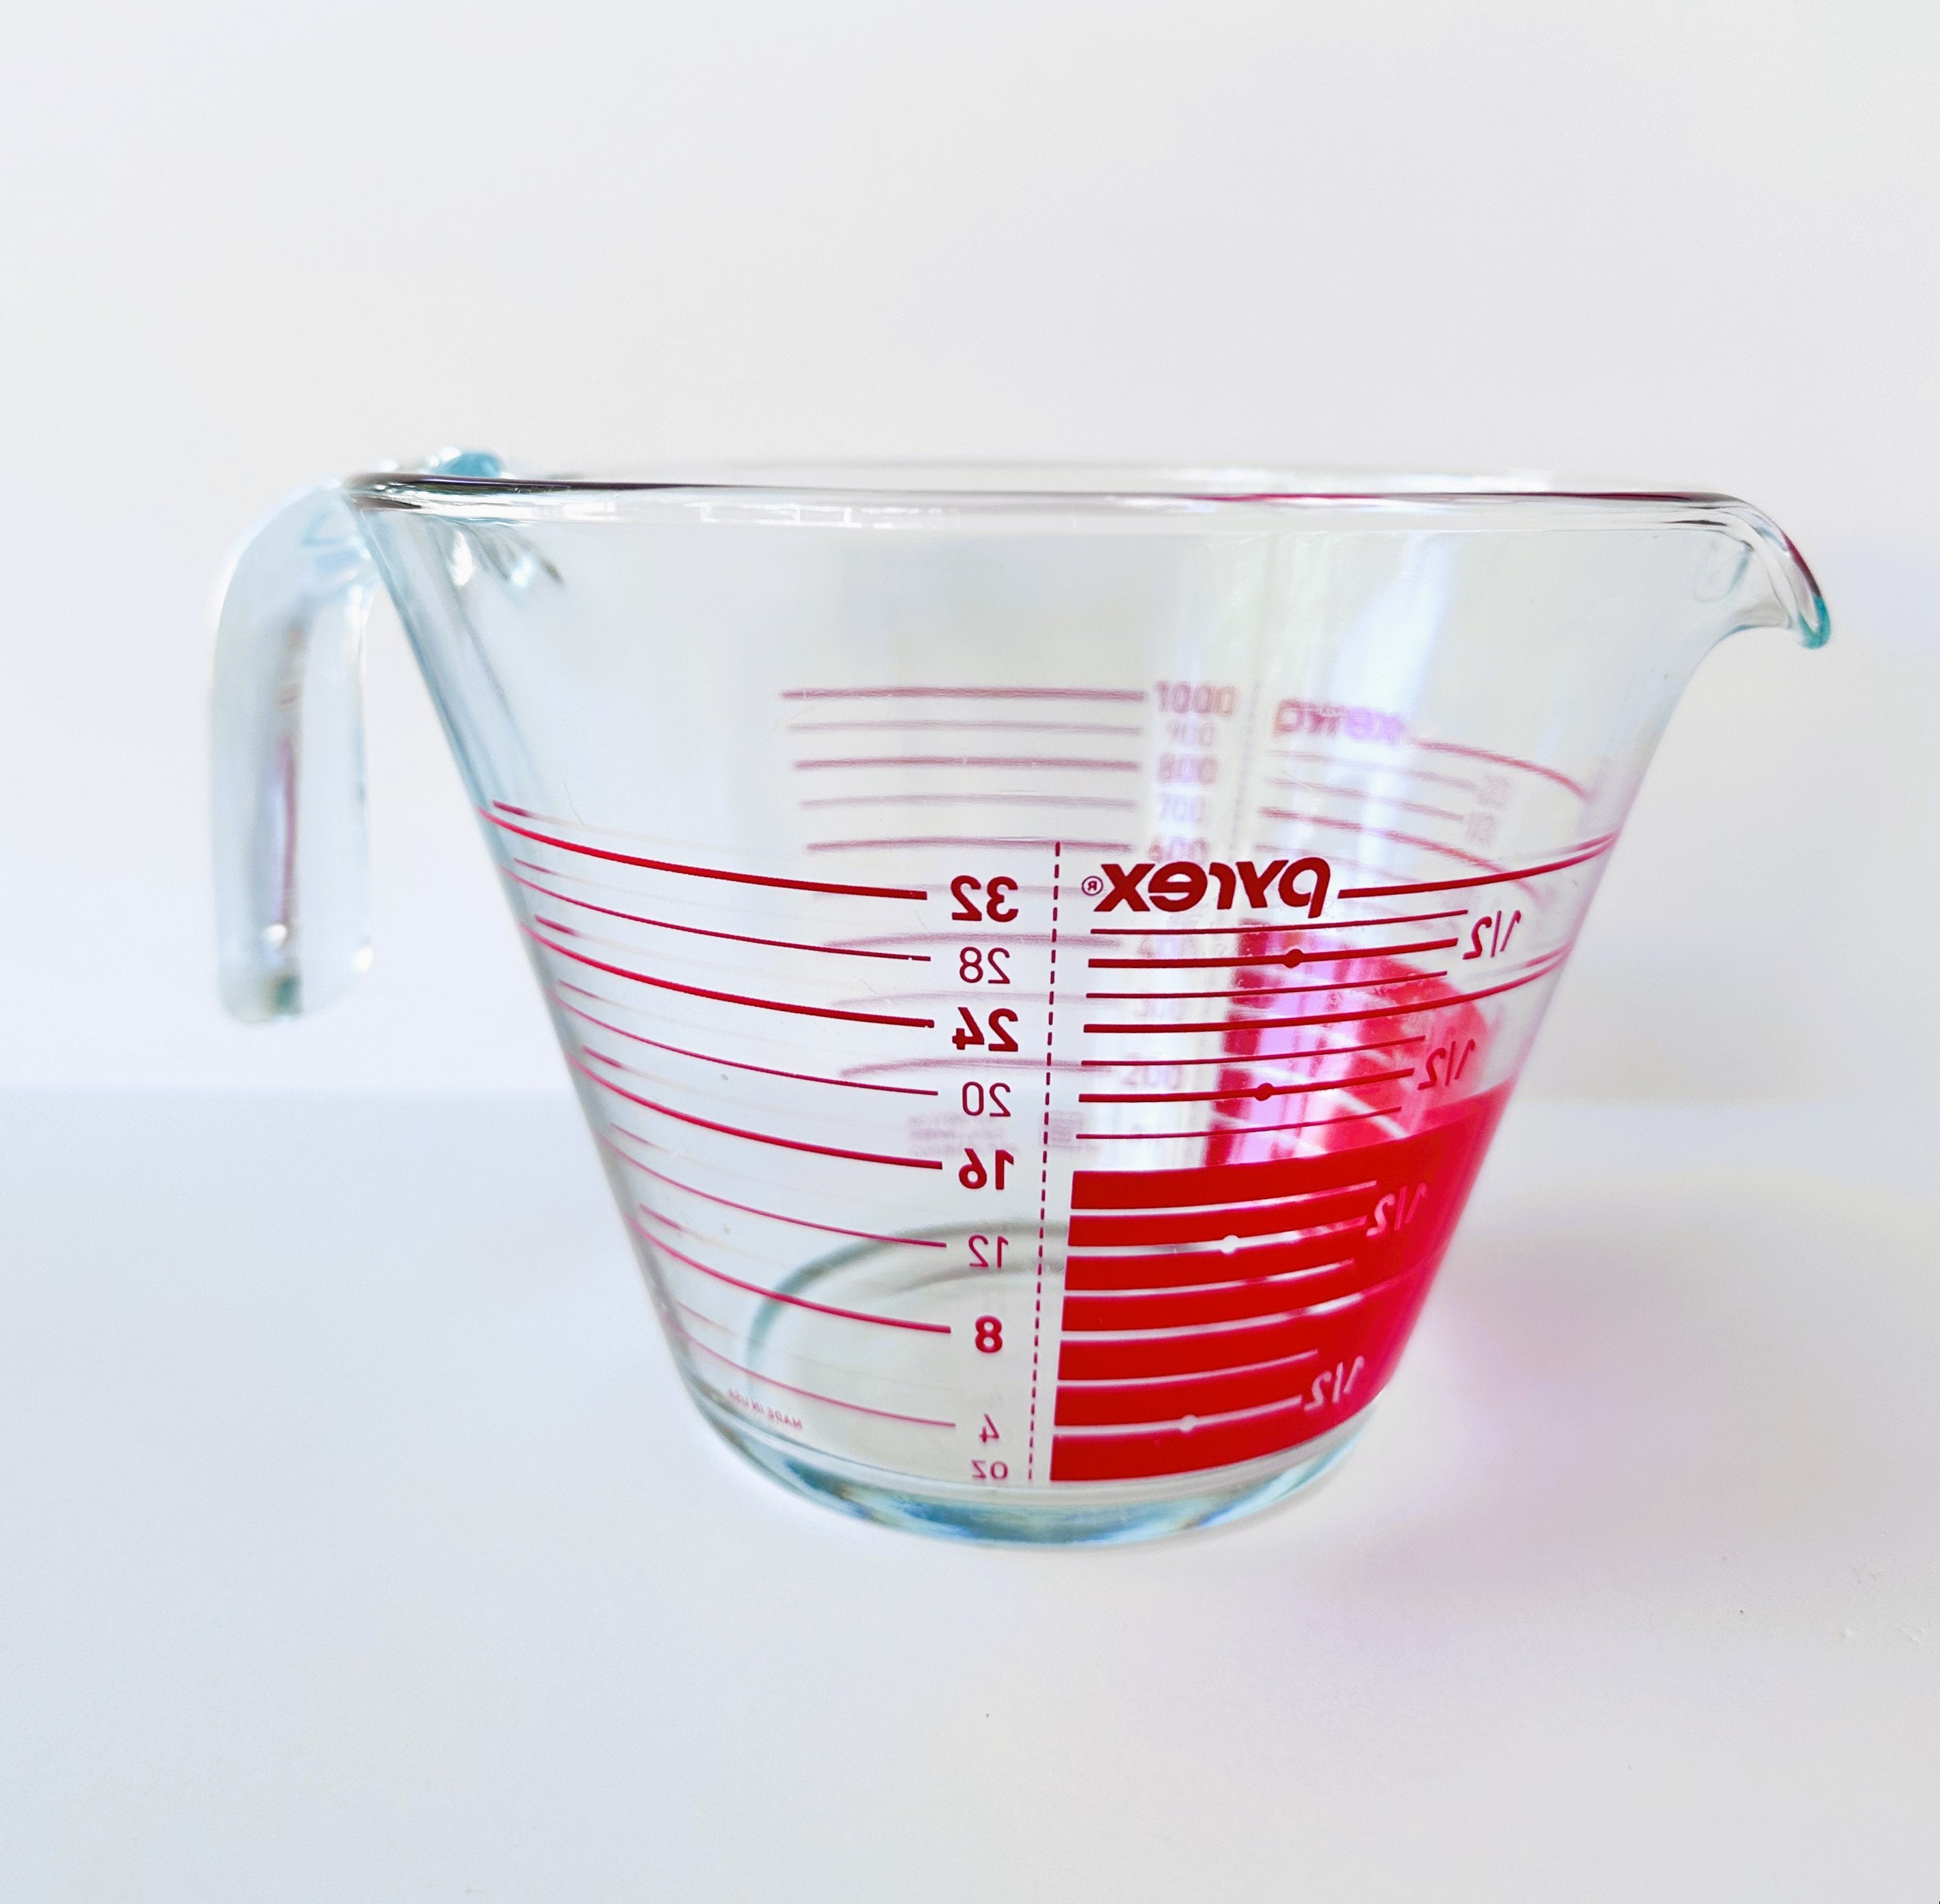 Large Medium Glass Pitchers, Pyrex Measuring Cup, & General Plastic Measuring  Cup